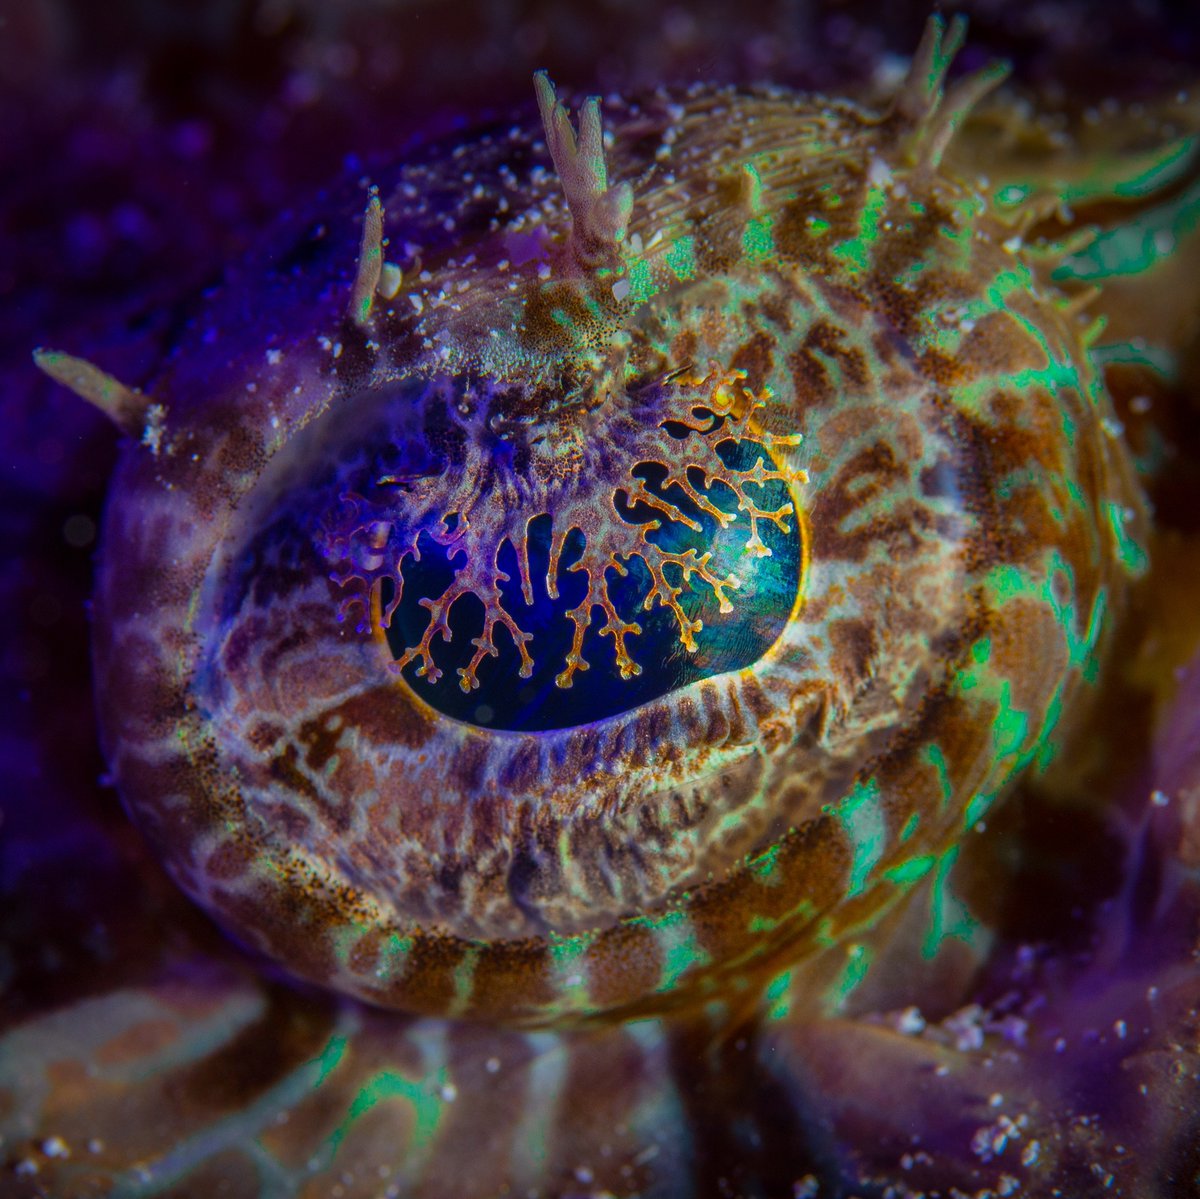 The most beautiful eye in the ocean? Many macro photographers would say yes! But what creature do these beautiful eyes belong to? Wrong answers only 👇 in the captions below! #underwatermacro #luminance #fluorescence #underwaterfluoro Image © Steve Miller